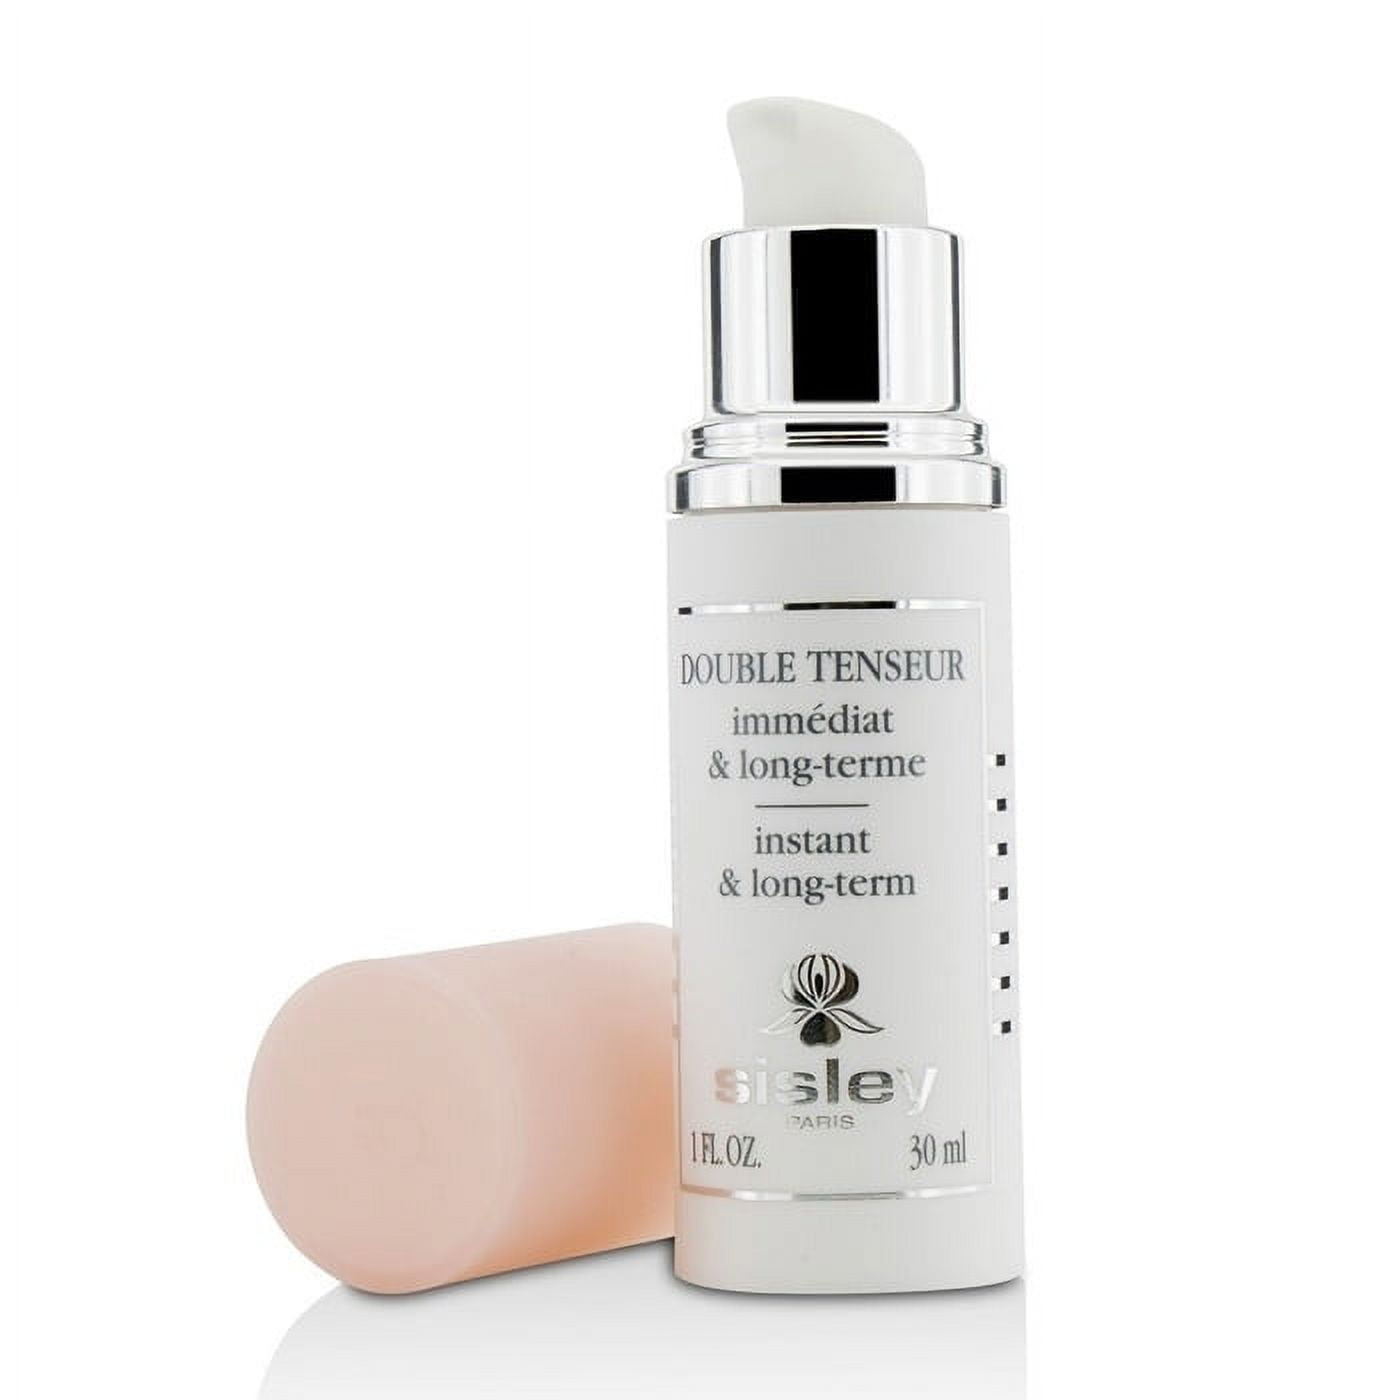 Alternatives comparable to Double Tenseur by Sisley Paris